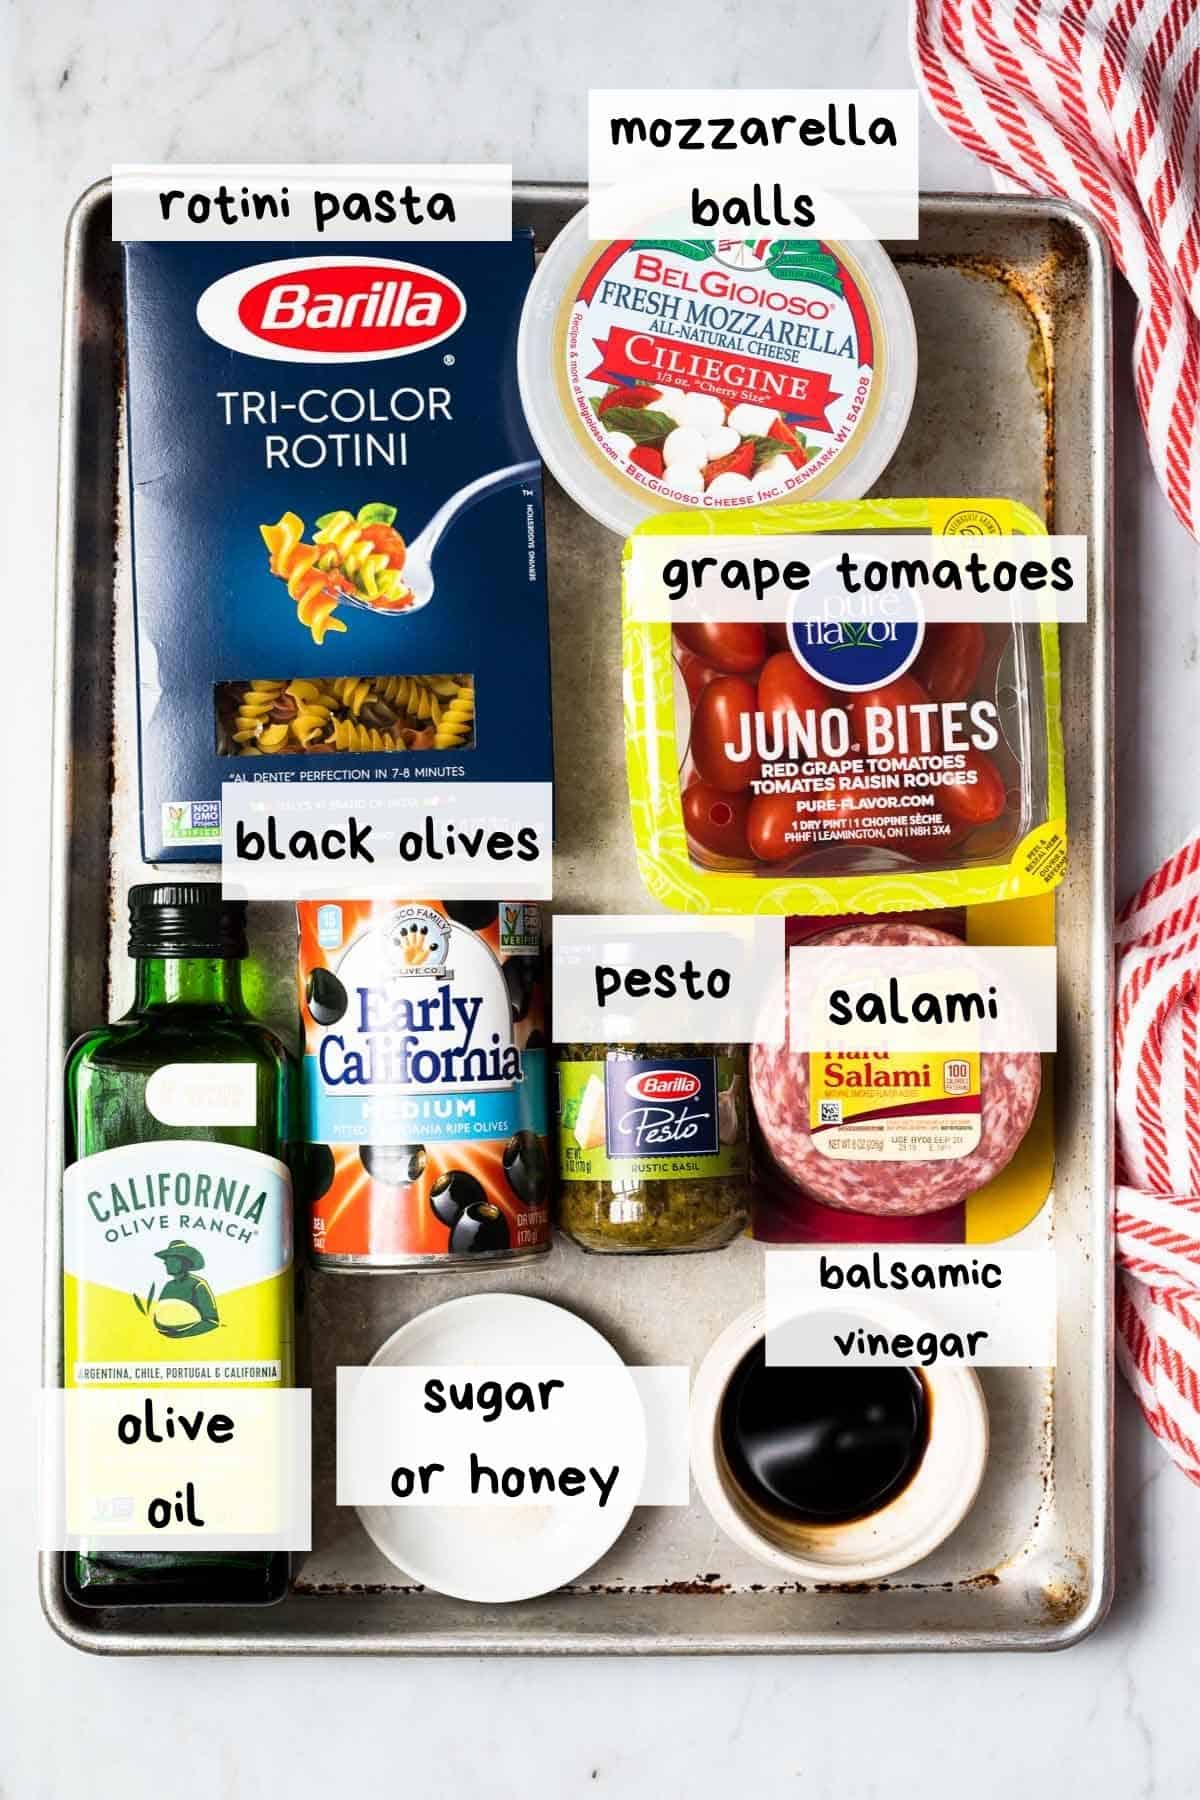 overhead view of the labeled ingredients on a baking tray